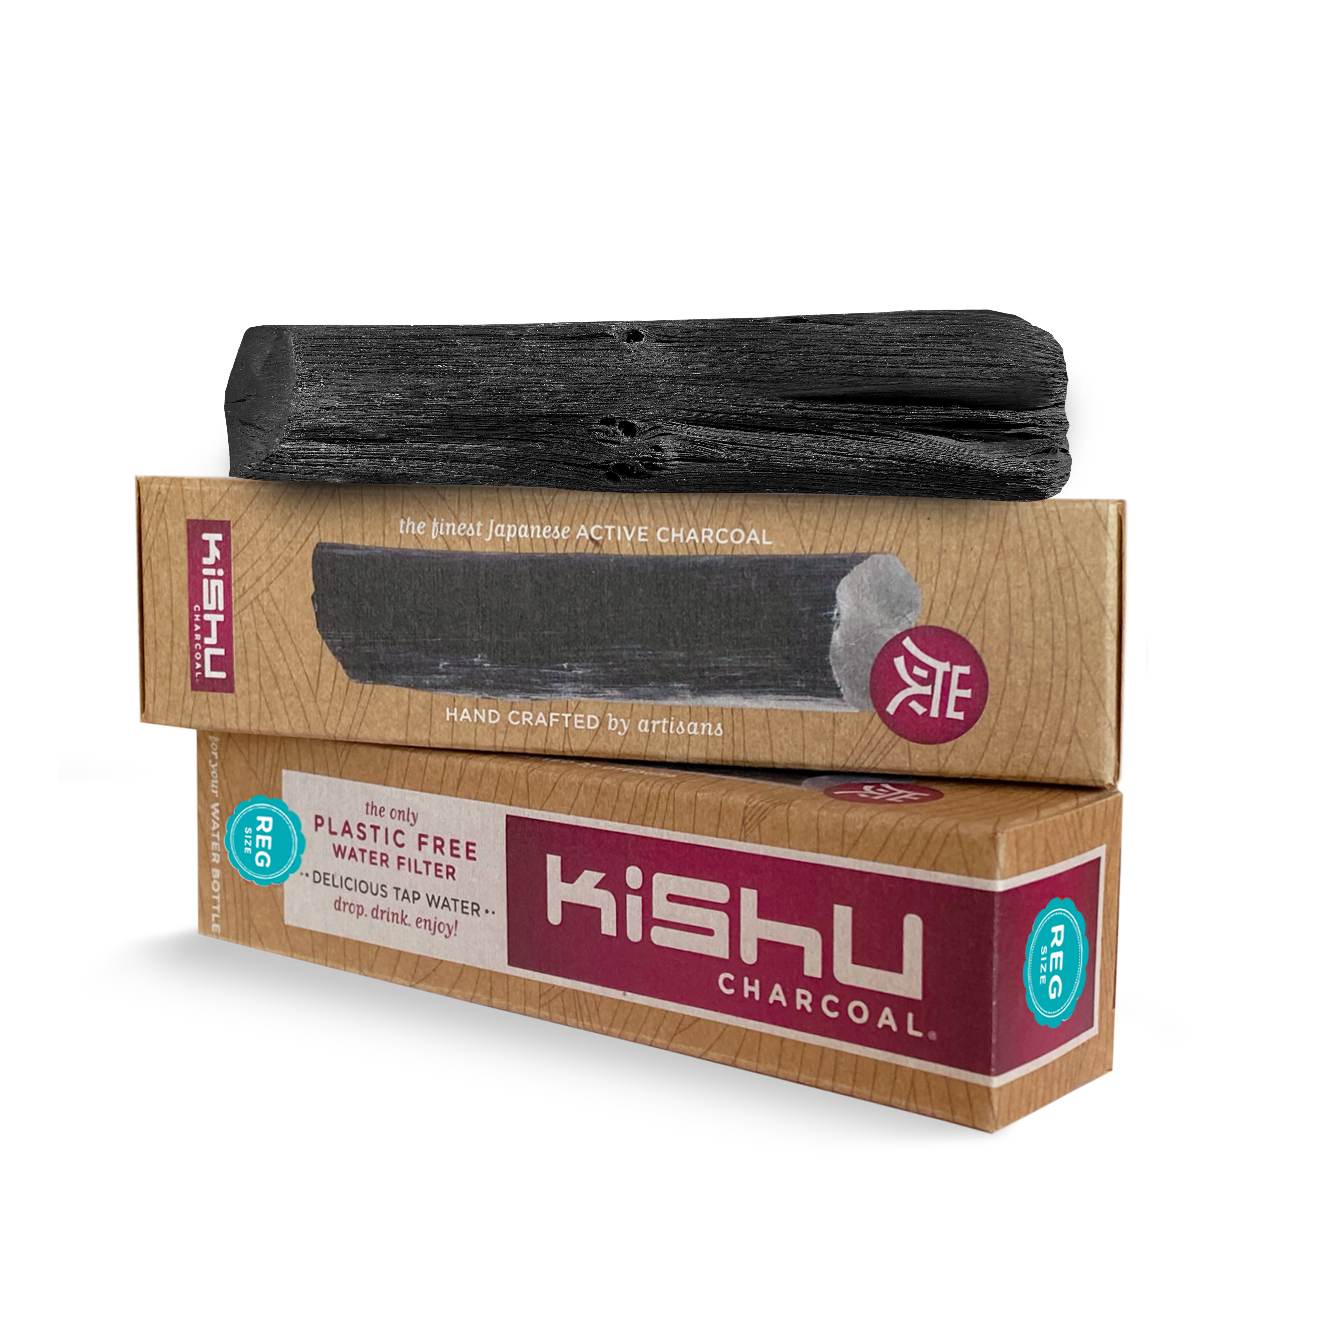 Kishu Charcoal Regular 2-Pack. The ONLY CERTIFIED and TESTED Activated Charcoal.